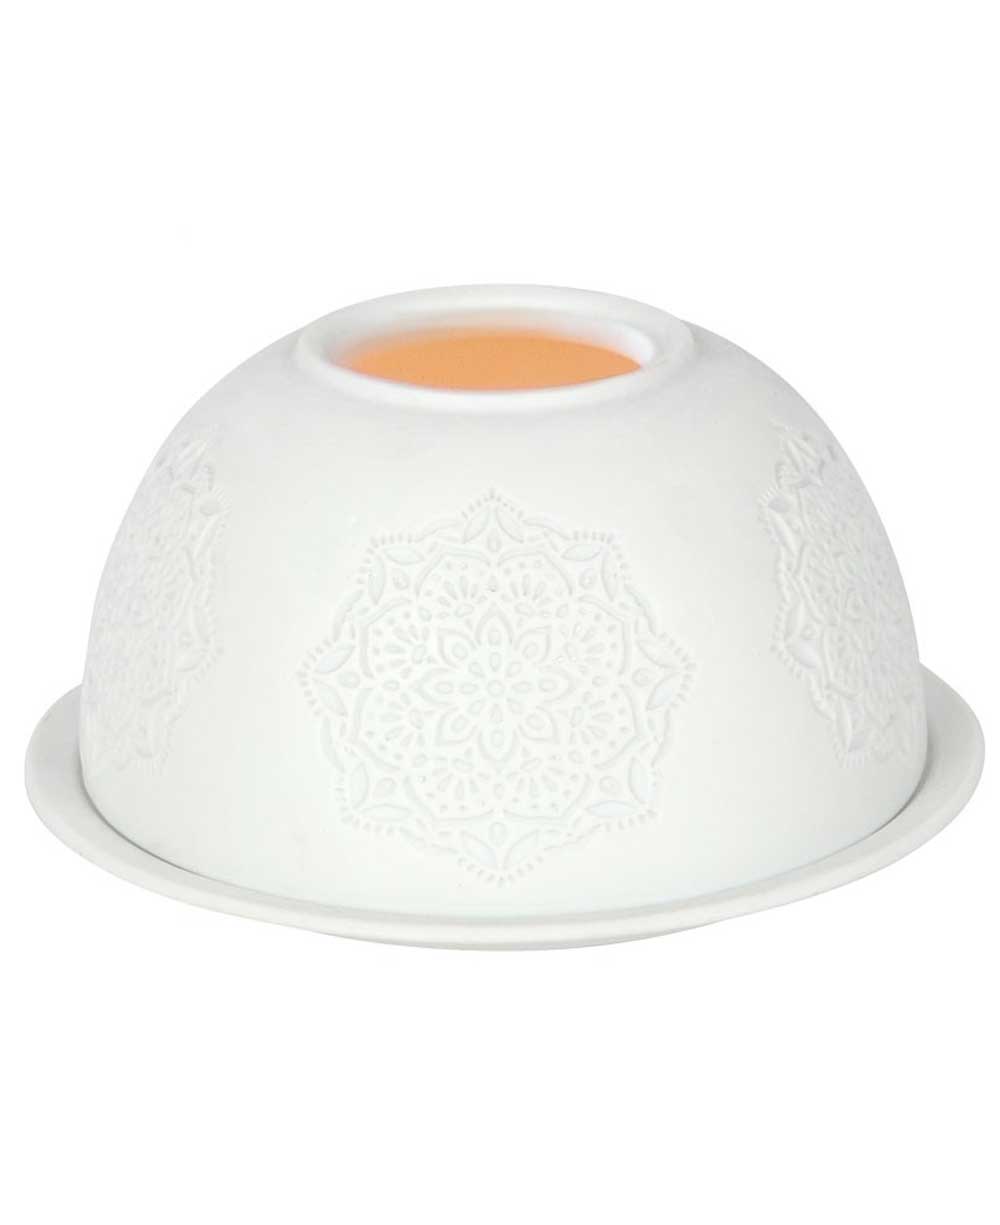 Mandala Dome Tealight Candle Holder – Transform Your Space with